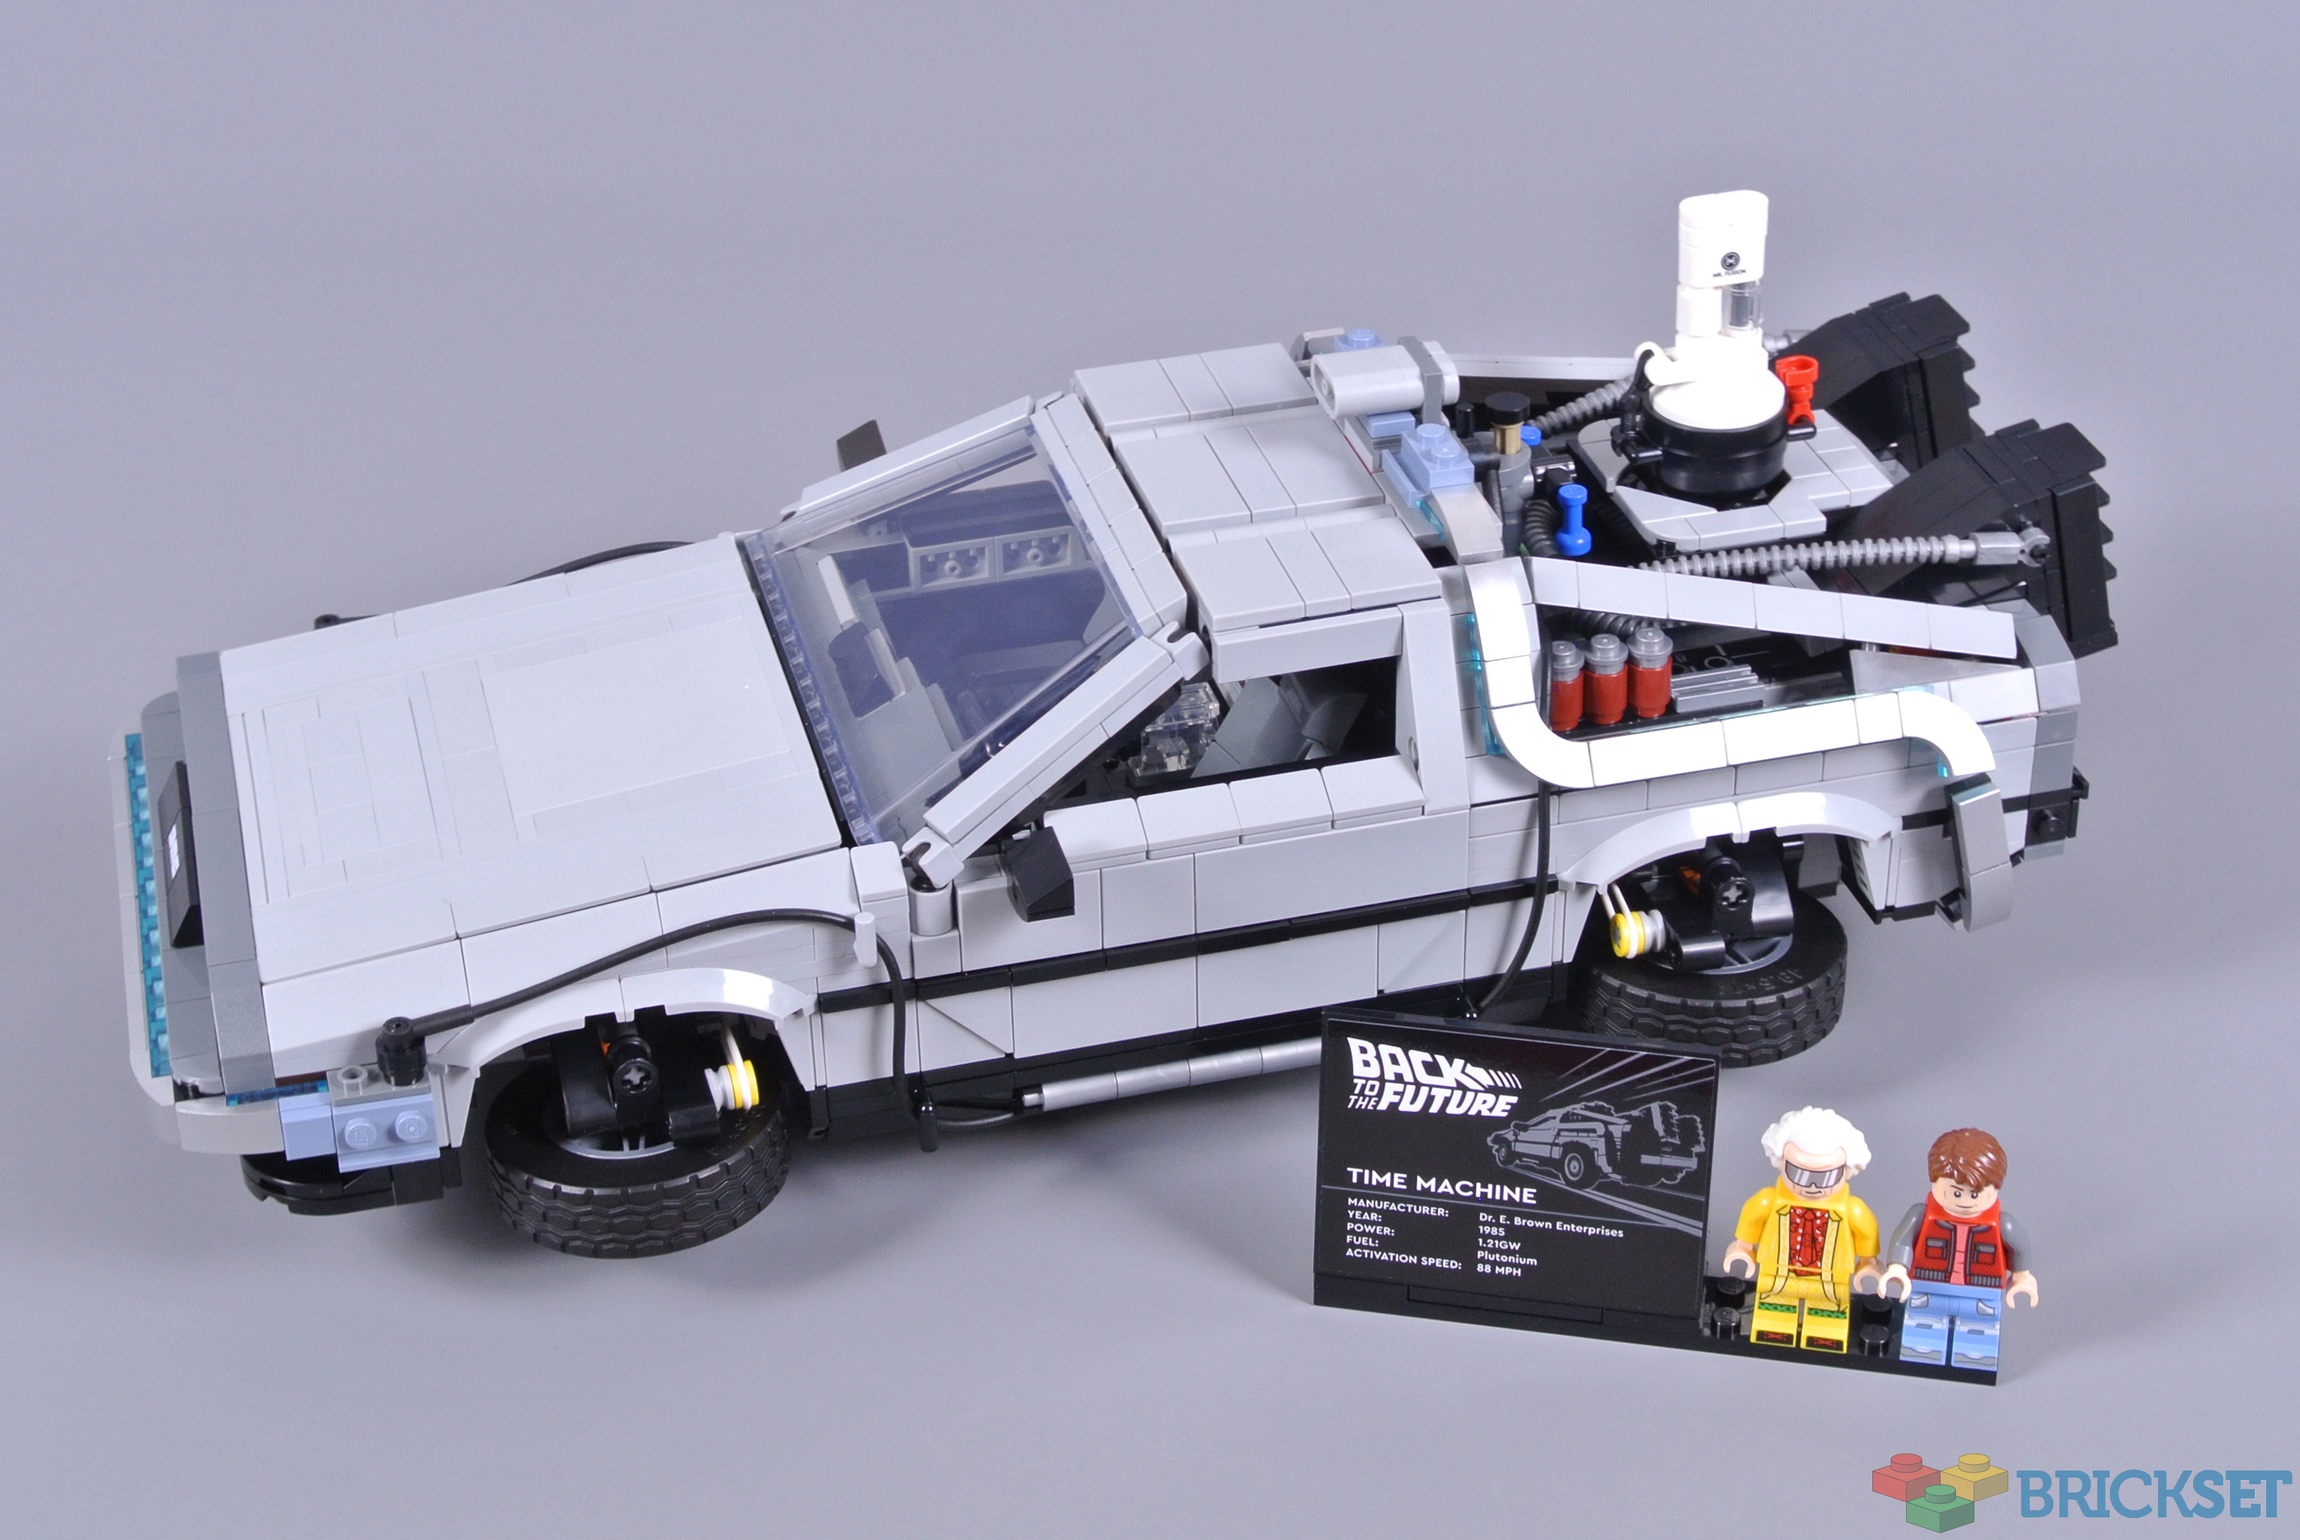 LEGO 10300 Back to the Future Time Machine review | Brickset